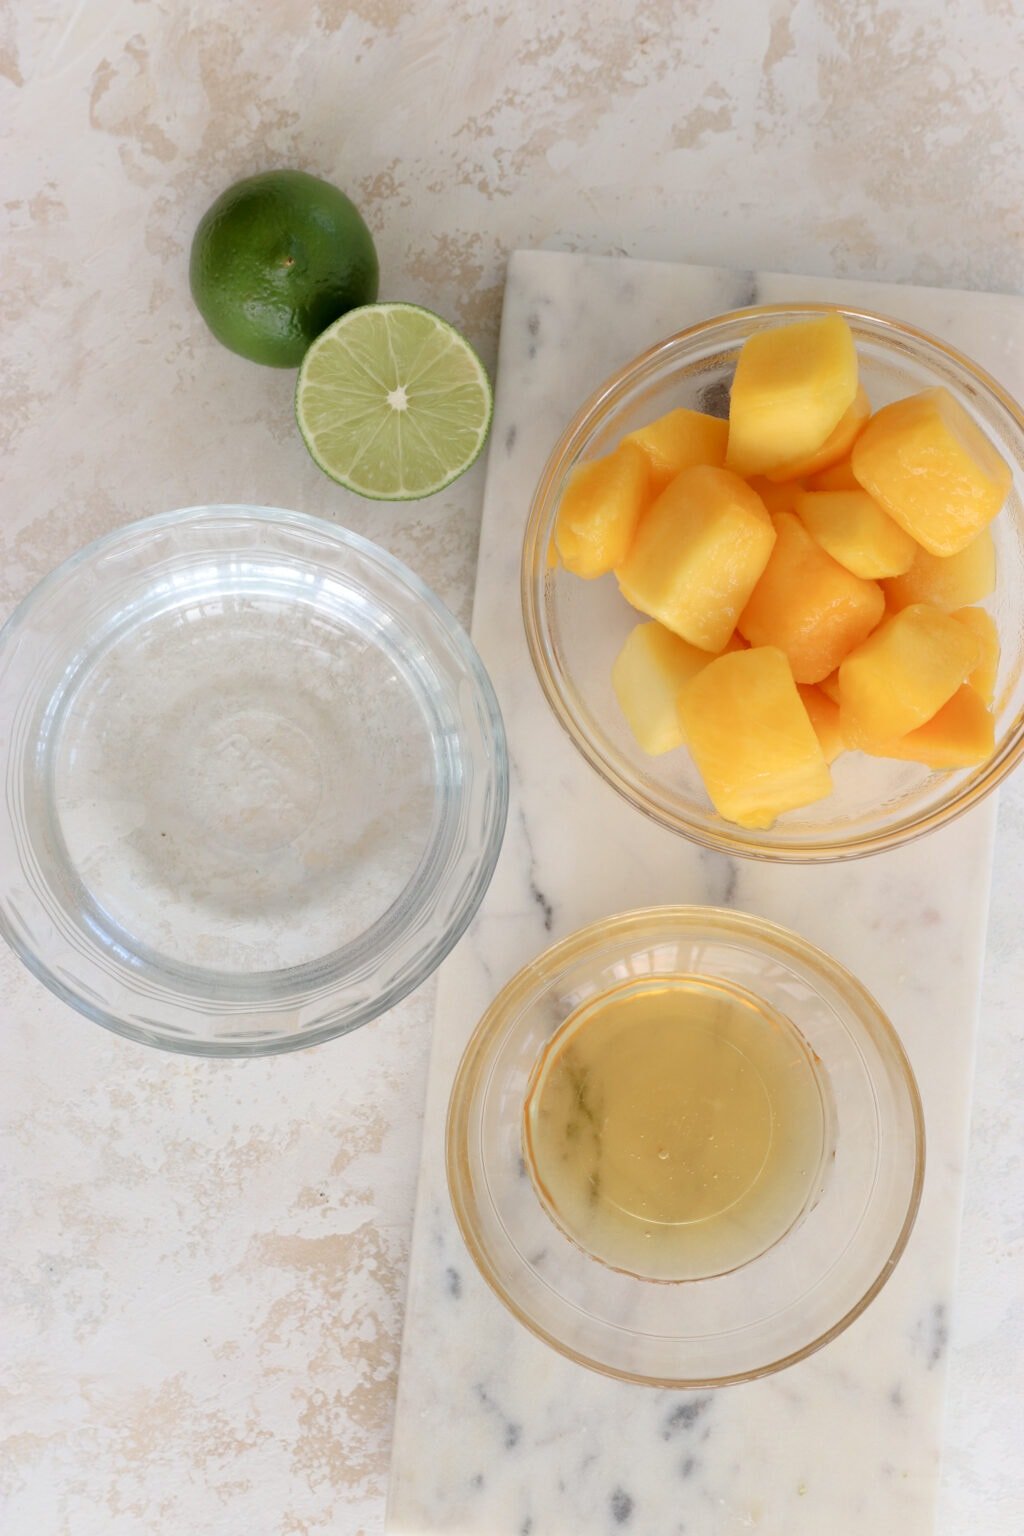 An overhead shot of ingredients for a recipe. In the top left is two lime halves, to the right of the limes is a clear bowl with cubed mango. To the lower left of the mango is a bowl of clear water. To the lower right of the water is a bowl of honey.